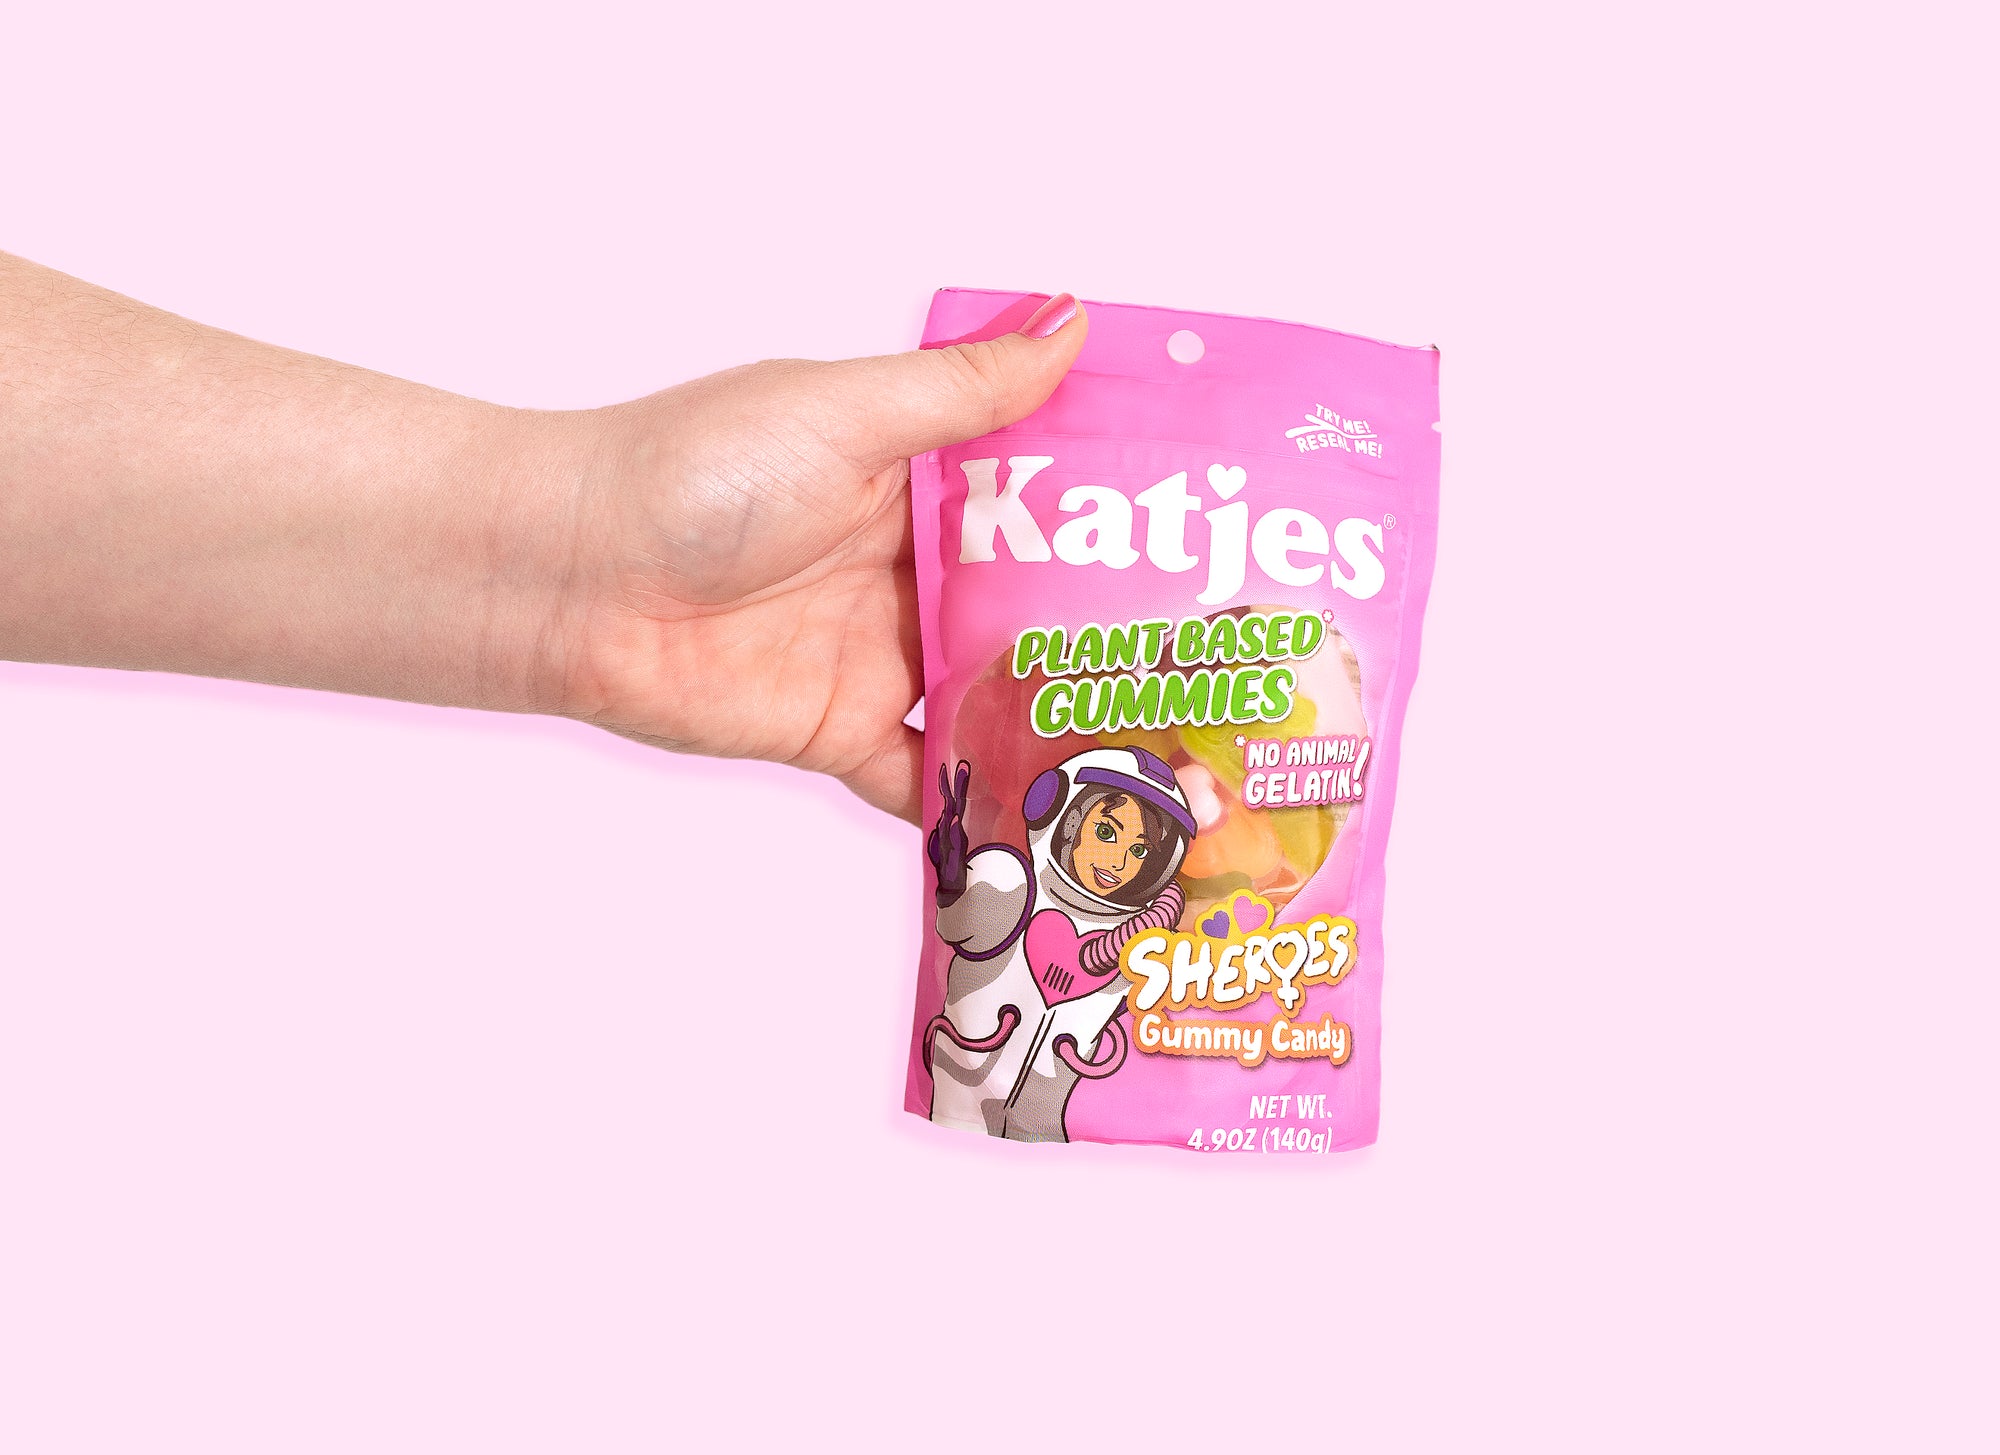 Product News | Katjes Launches Girl Power 'Sheroes' Gummies